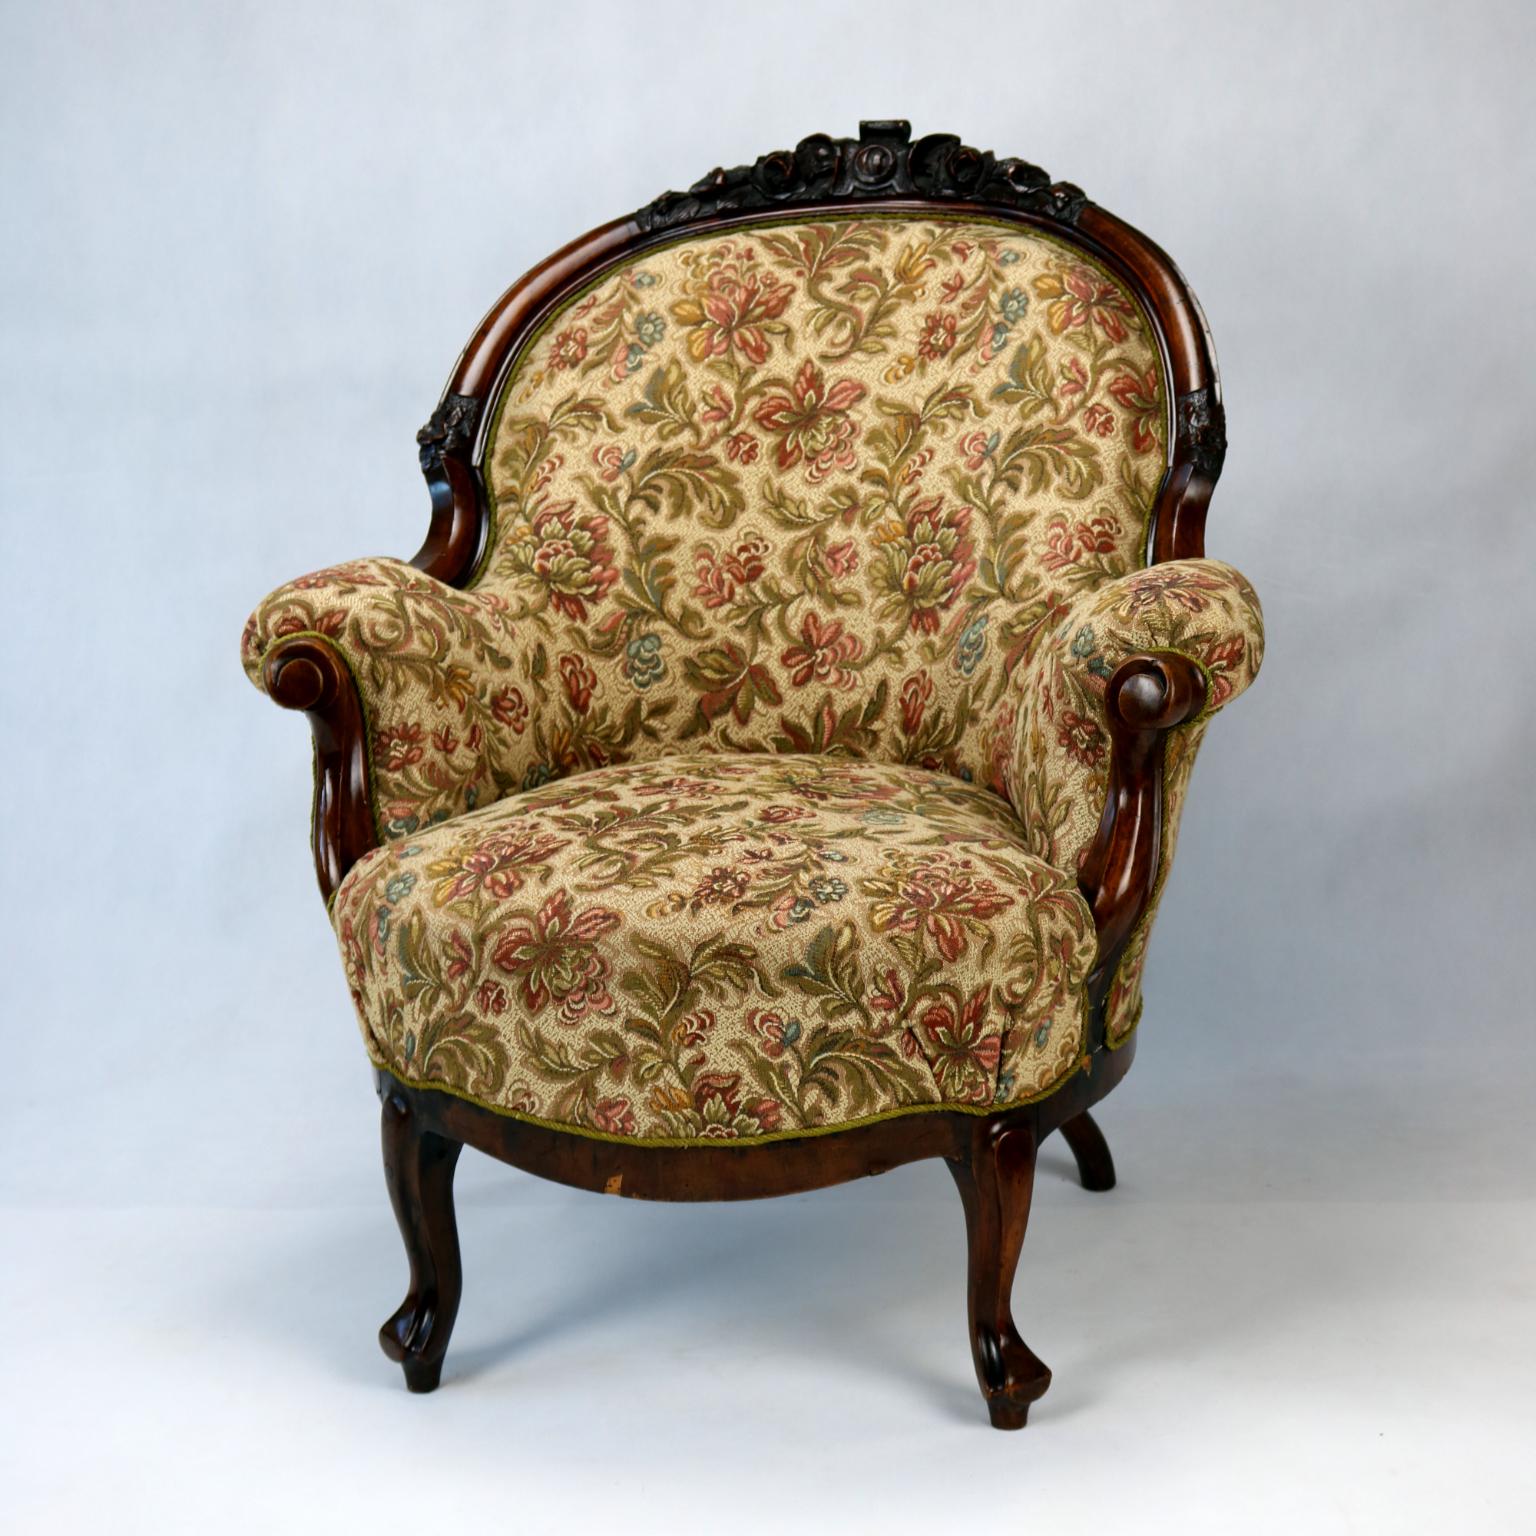 Carved walnut armchair from the second half of 19th century, Austria.